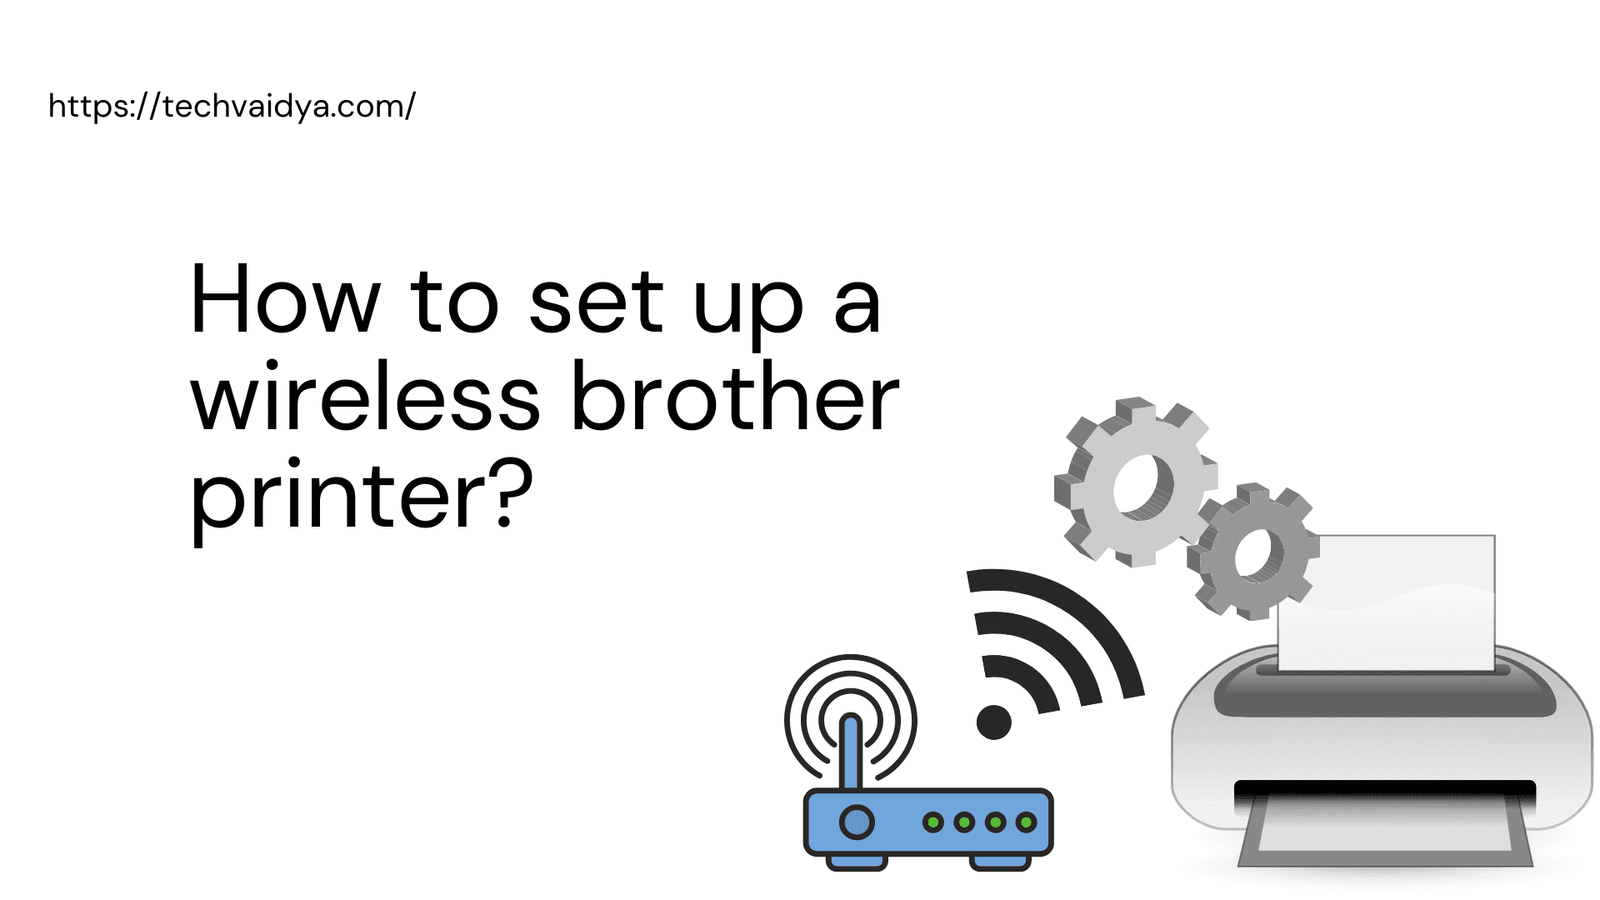 How to set up a wireless brother printer